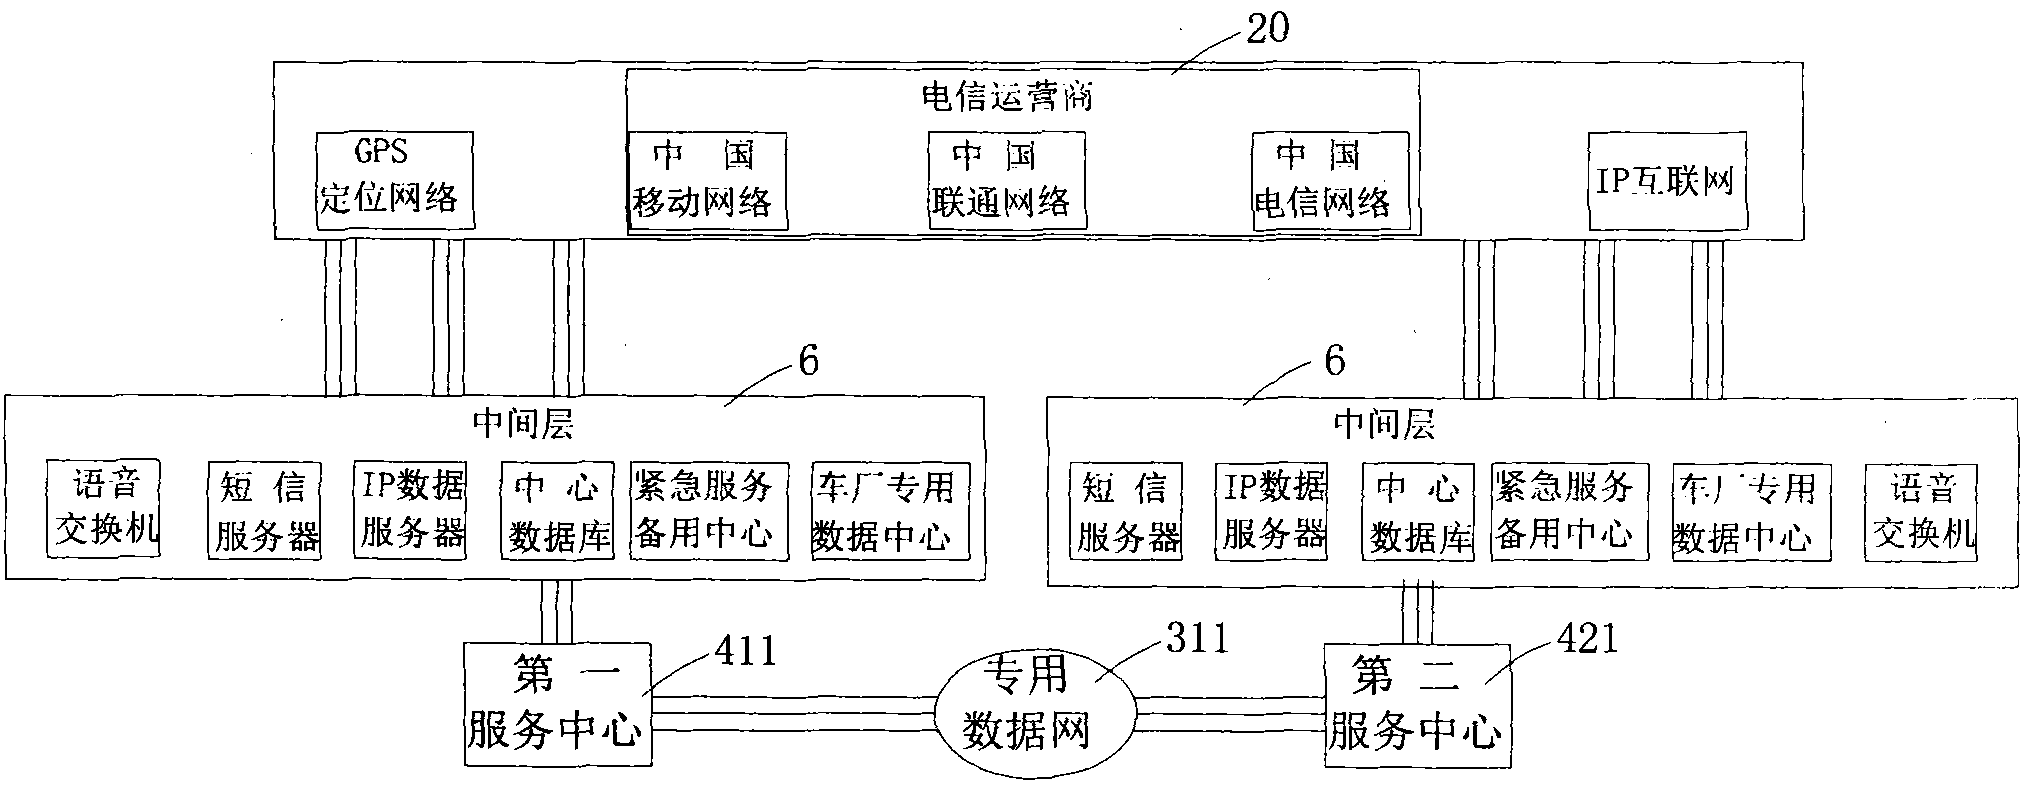 Terminal self-adaption system and terminal self-adaption method of access address for home services